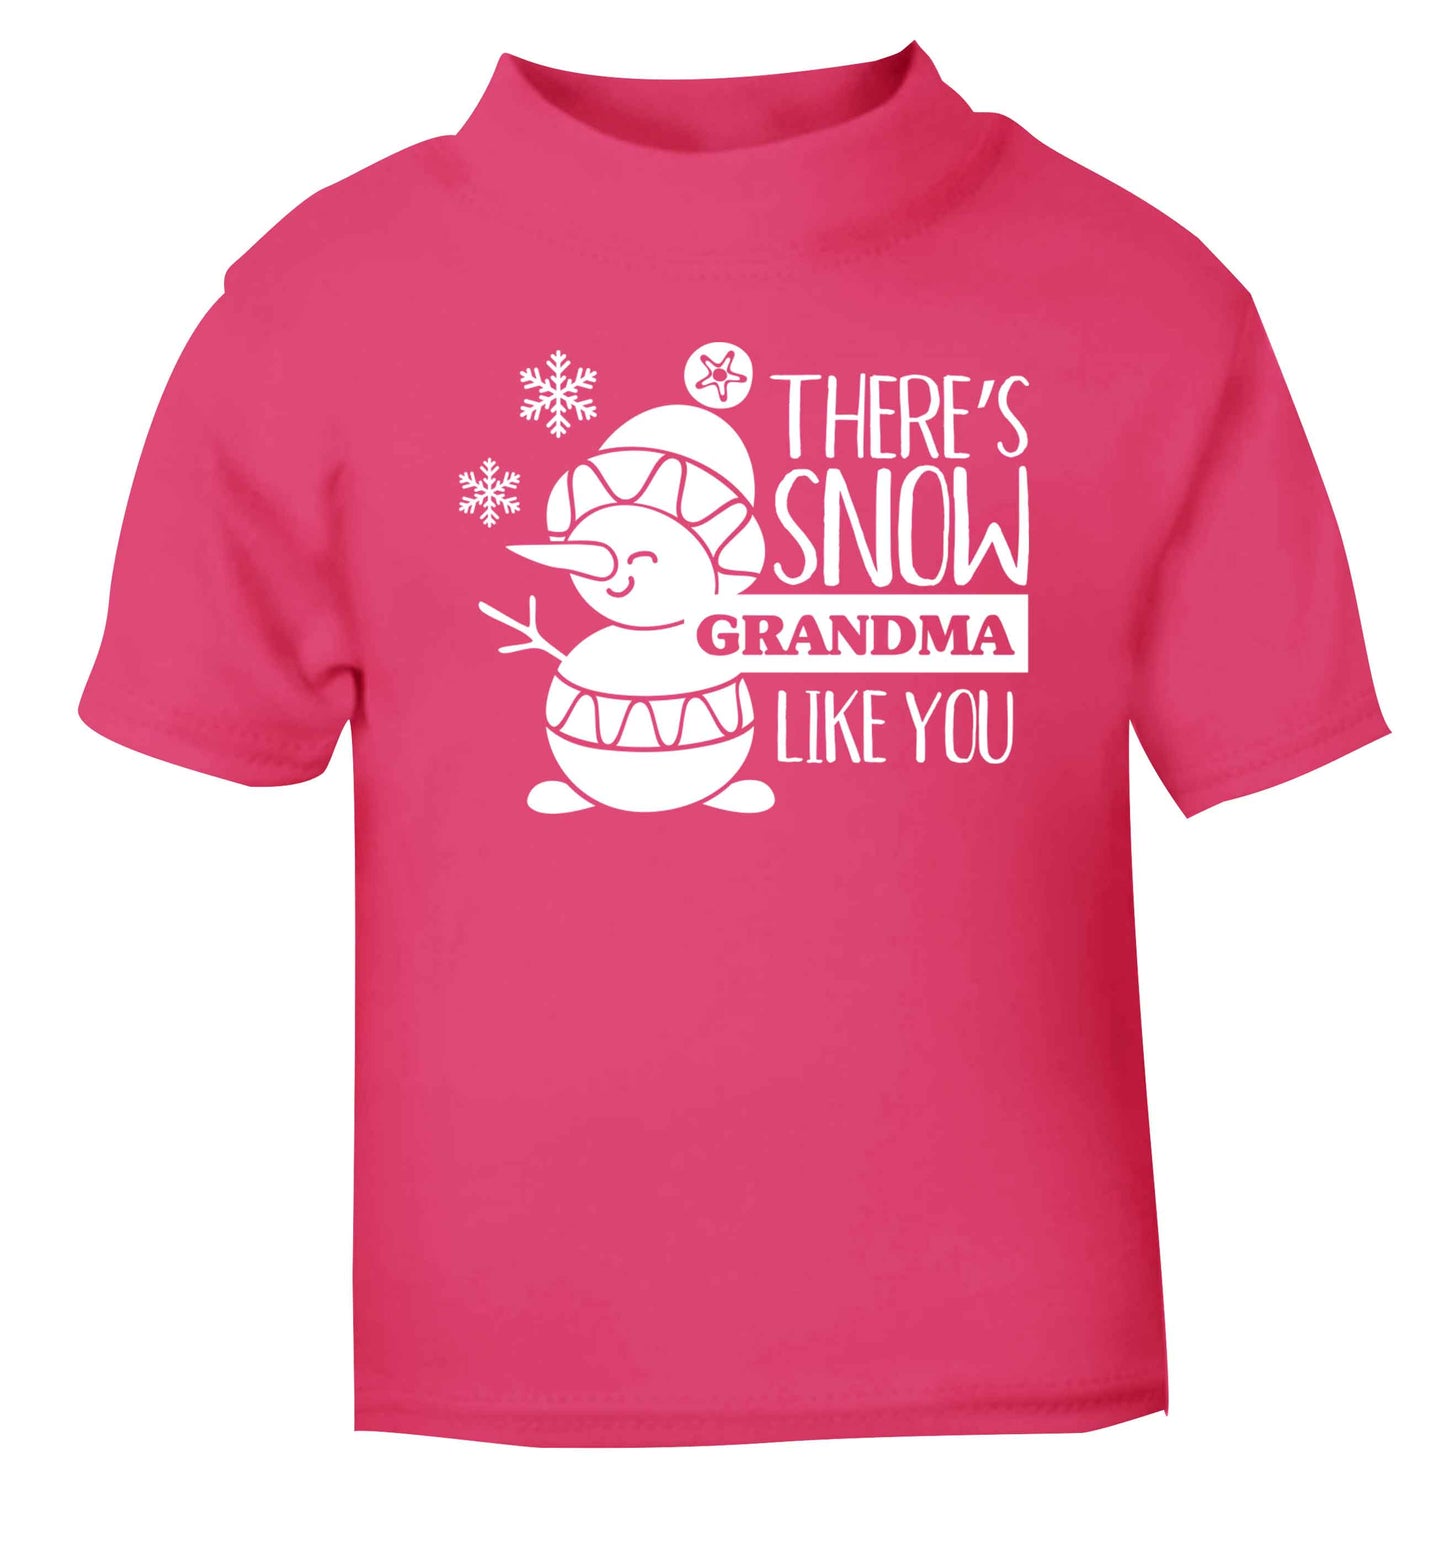 There's snow grandma like you pink baby toddler Tshirt 2 Years